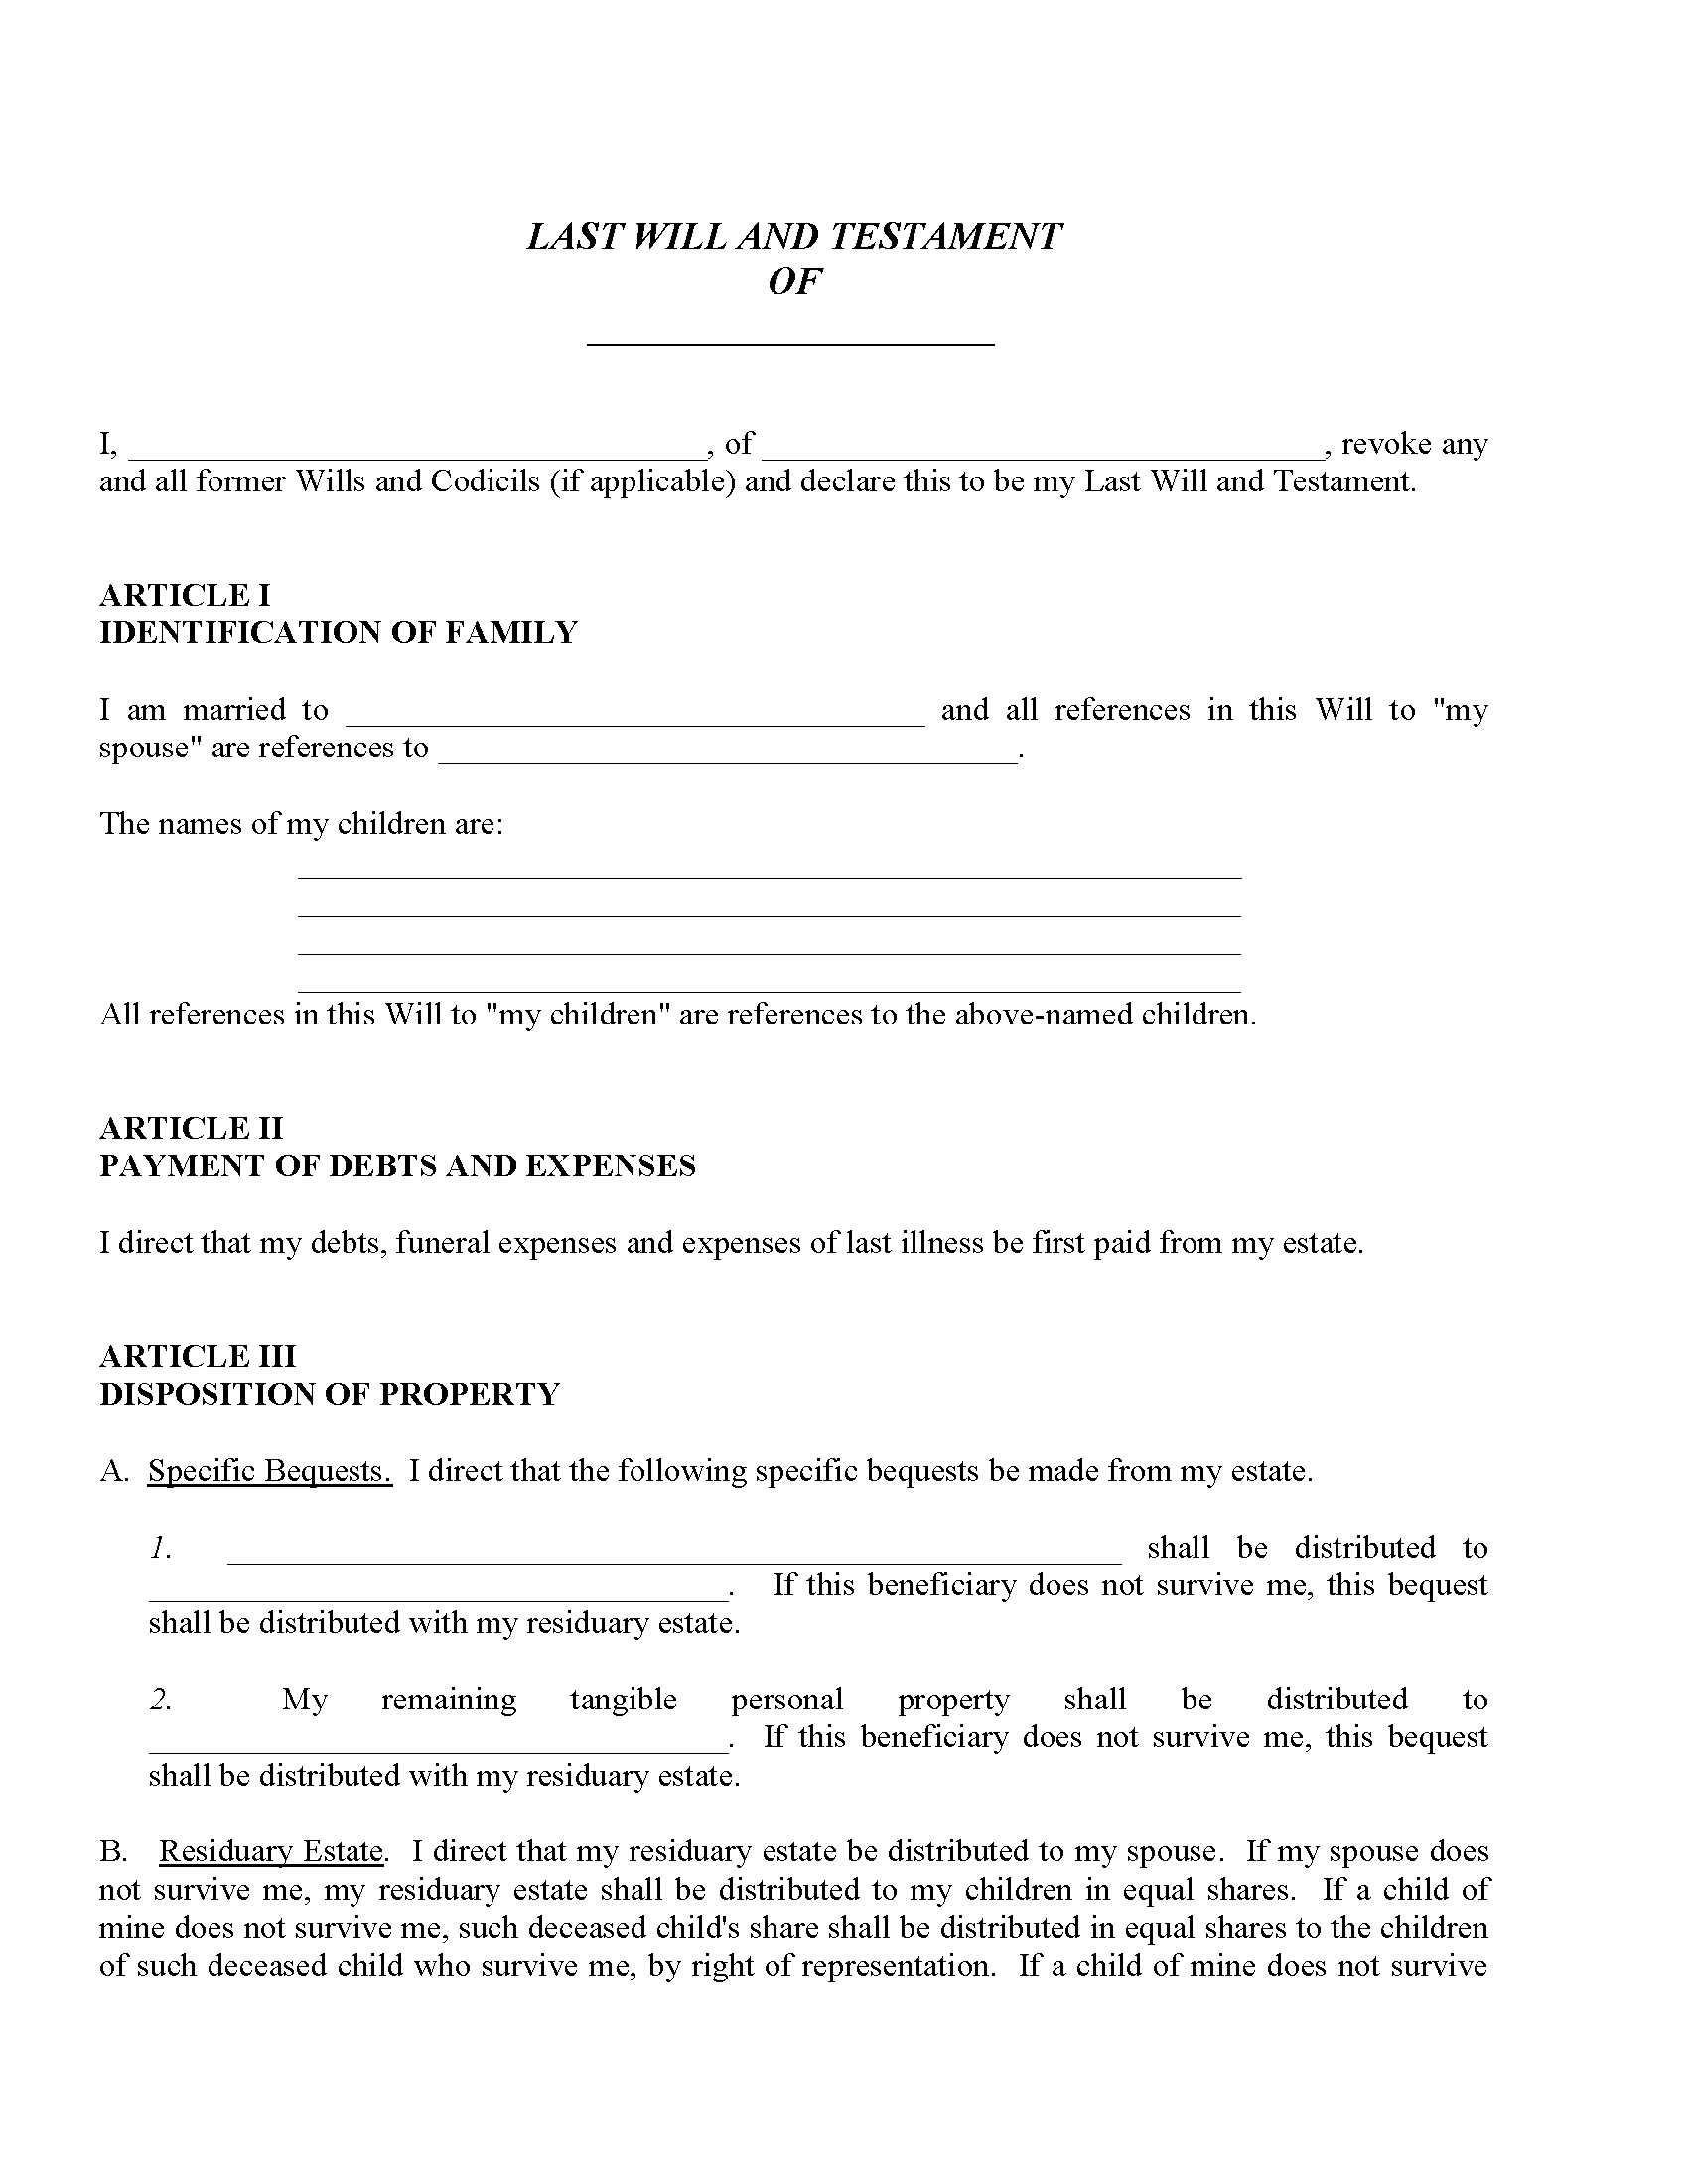 Pennsylvania Last Will and Testament Free Printable Legal Forms